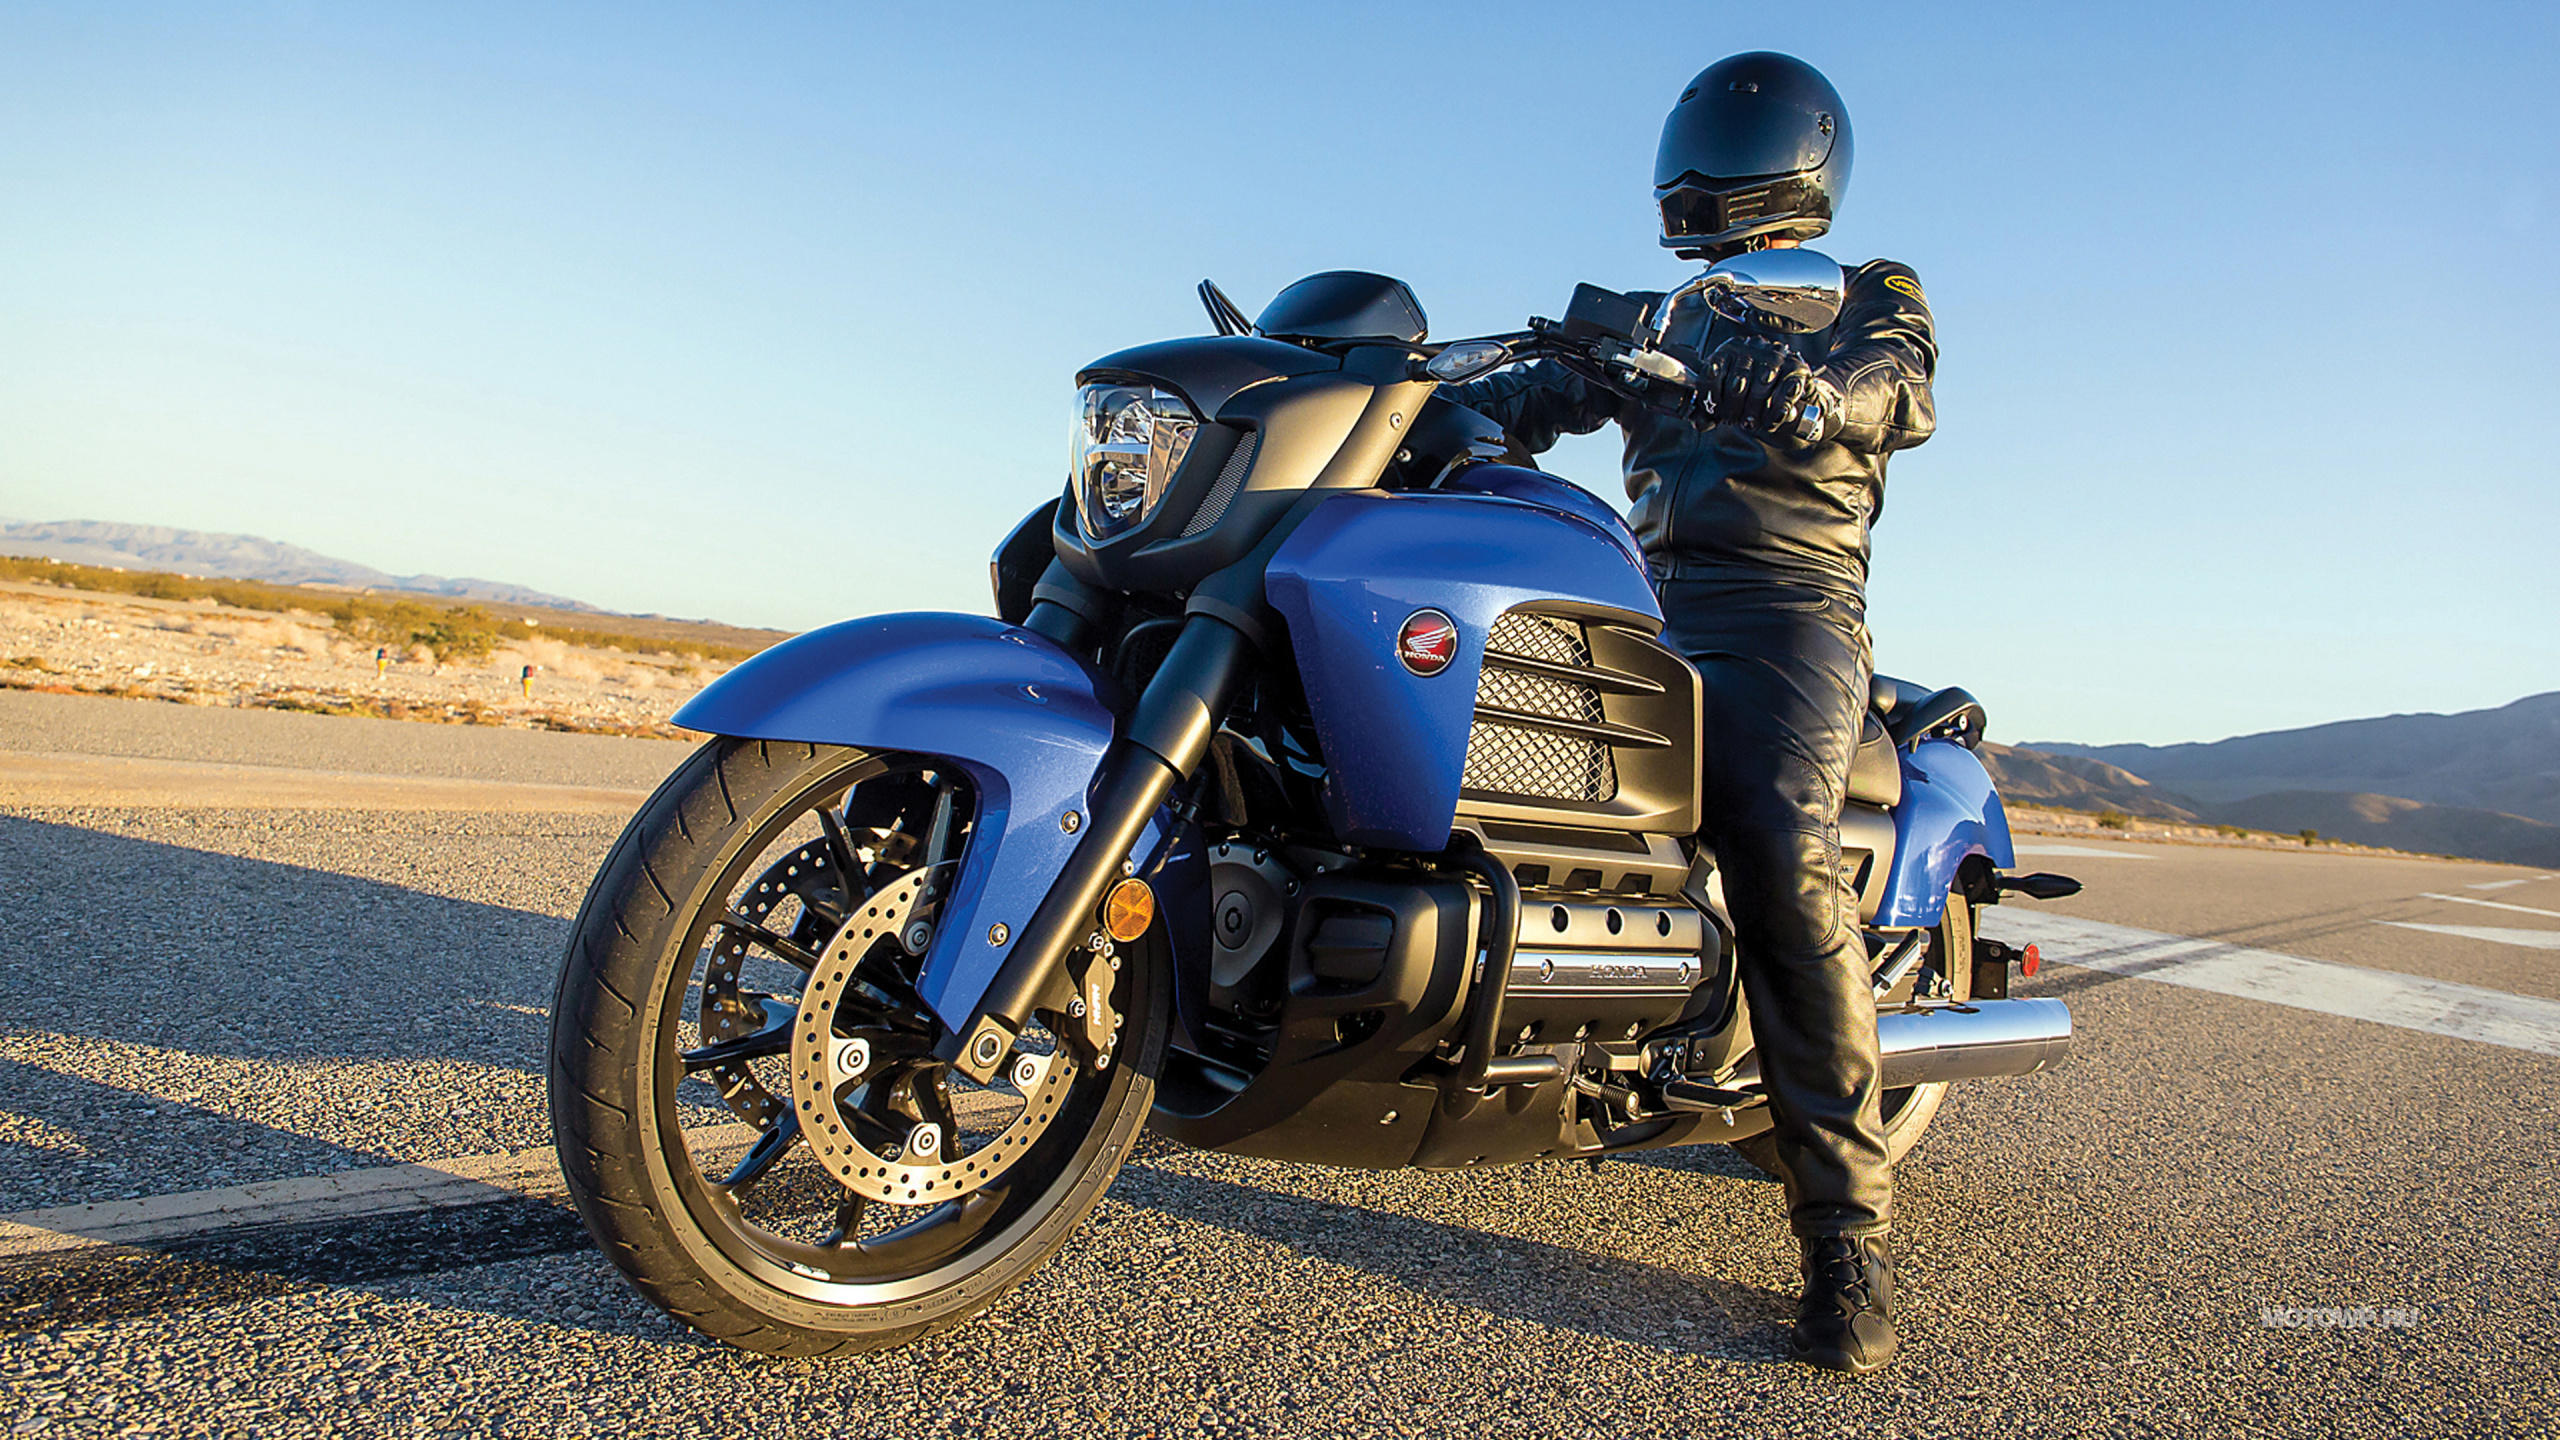 Man in Black Leather Jacket and Black Pants Riding Blue and Black Motorcycle. Wallpaper in 2560x1440 Resolution